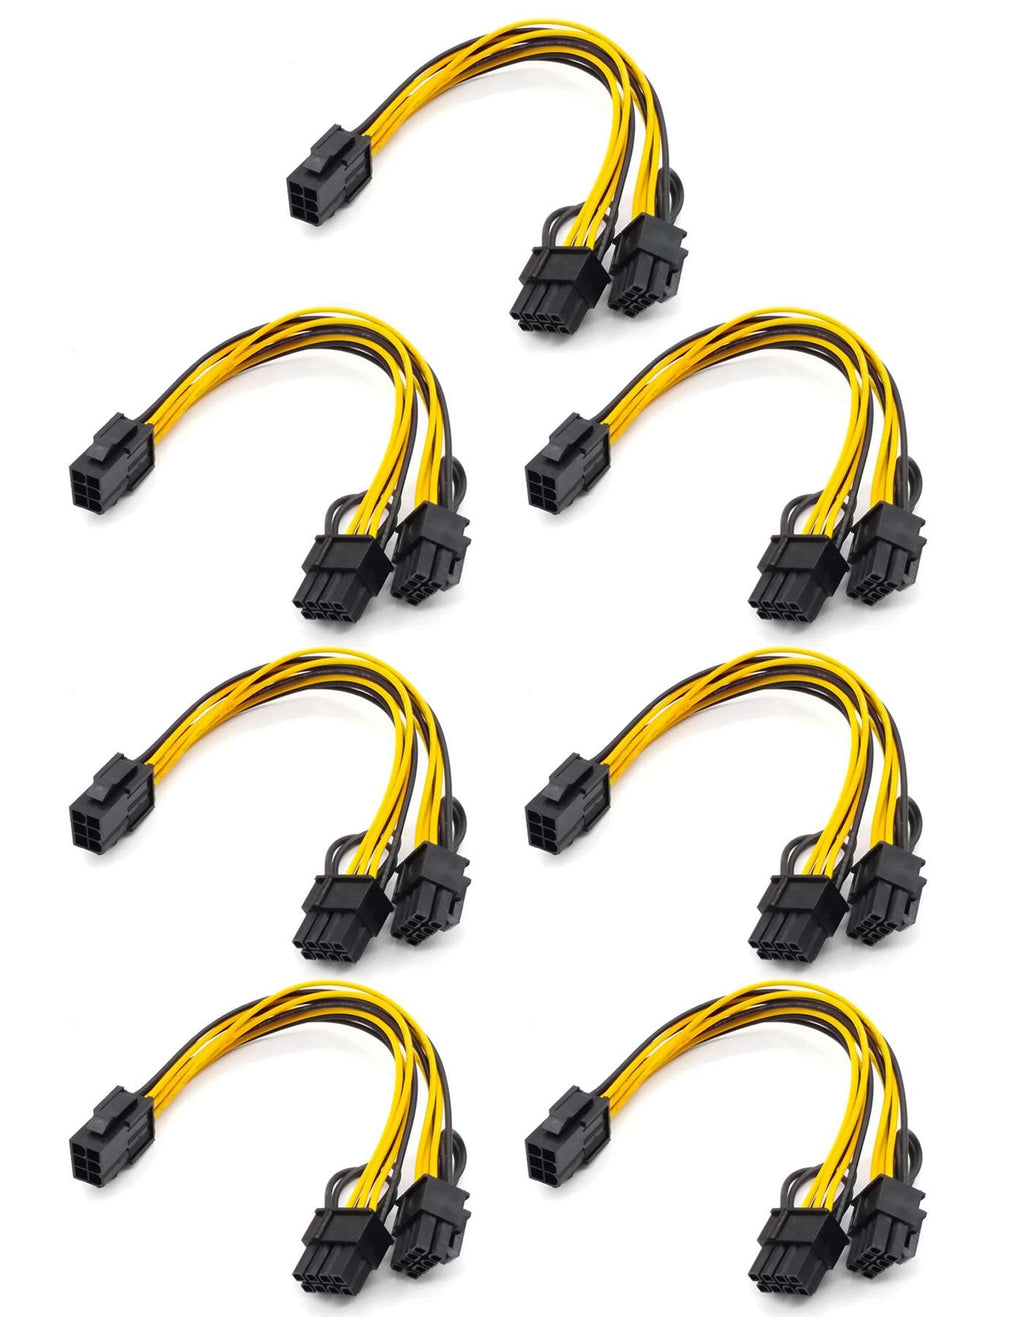  [AUSTRALIA] - Graphics Card 6 Pin to Double 8 Pin 6+2 Pin PCIE Adapter Cable line, 7-Pack 6 pin to 8 pin PCI-e Express Power GPU Video Care Cable, 9Inches / 23CM (6 pin to Double 8 pin) 7 wraps